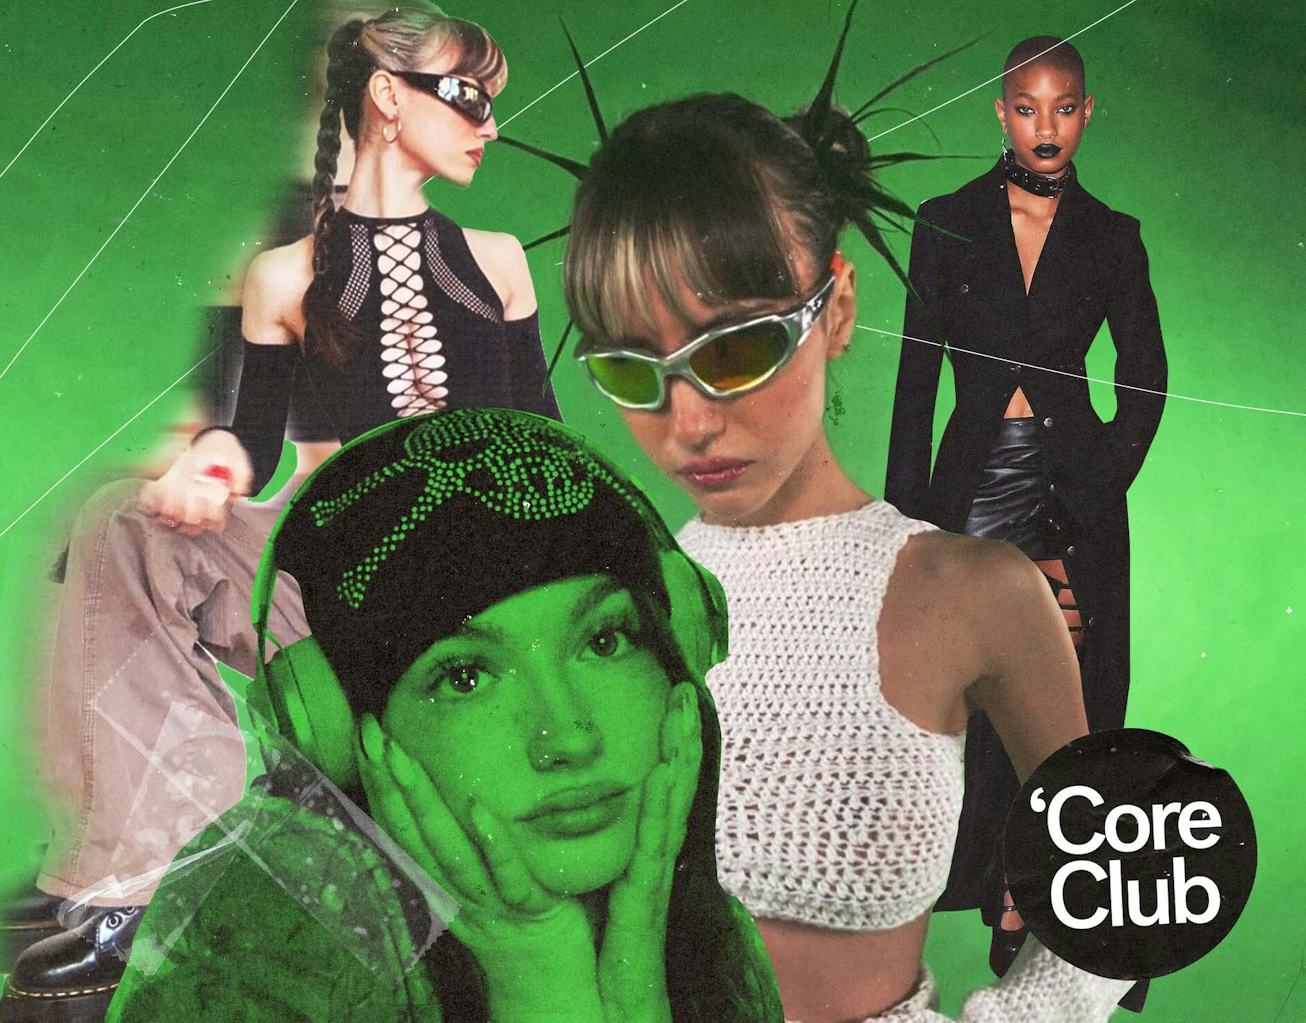  Cybercore, the ultimate Y2K fashion aesthetic trend